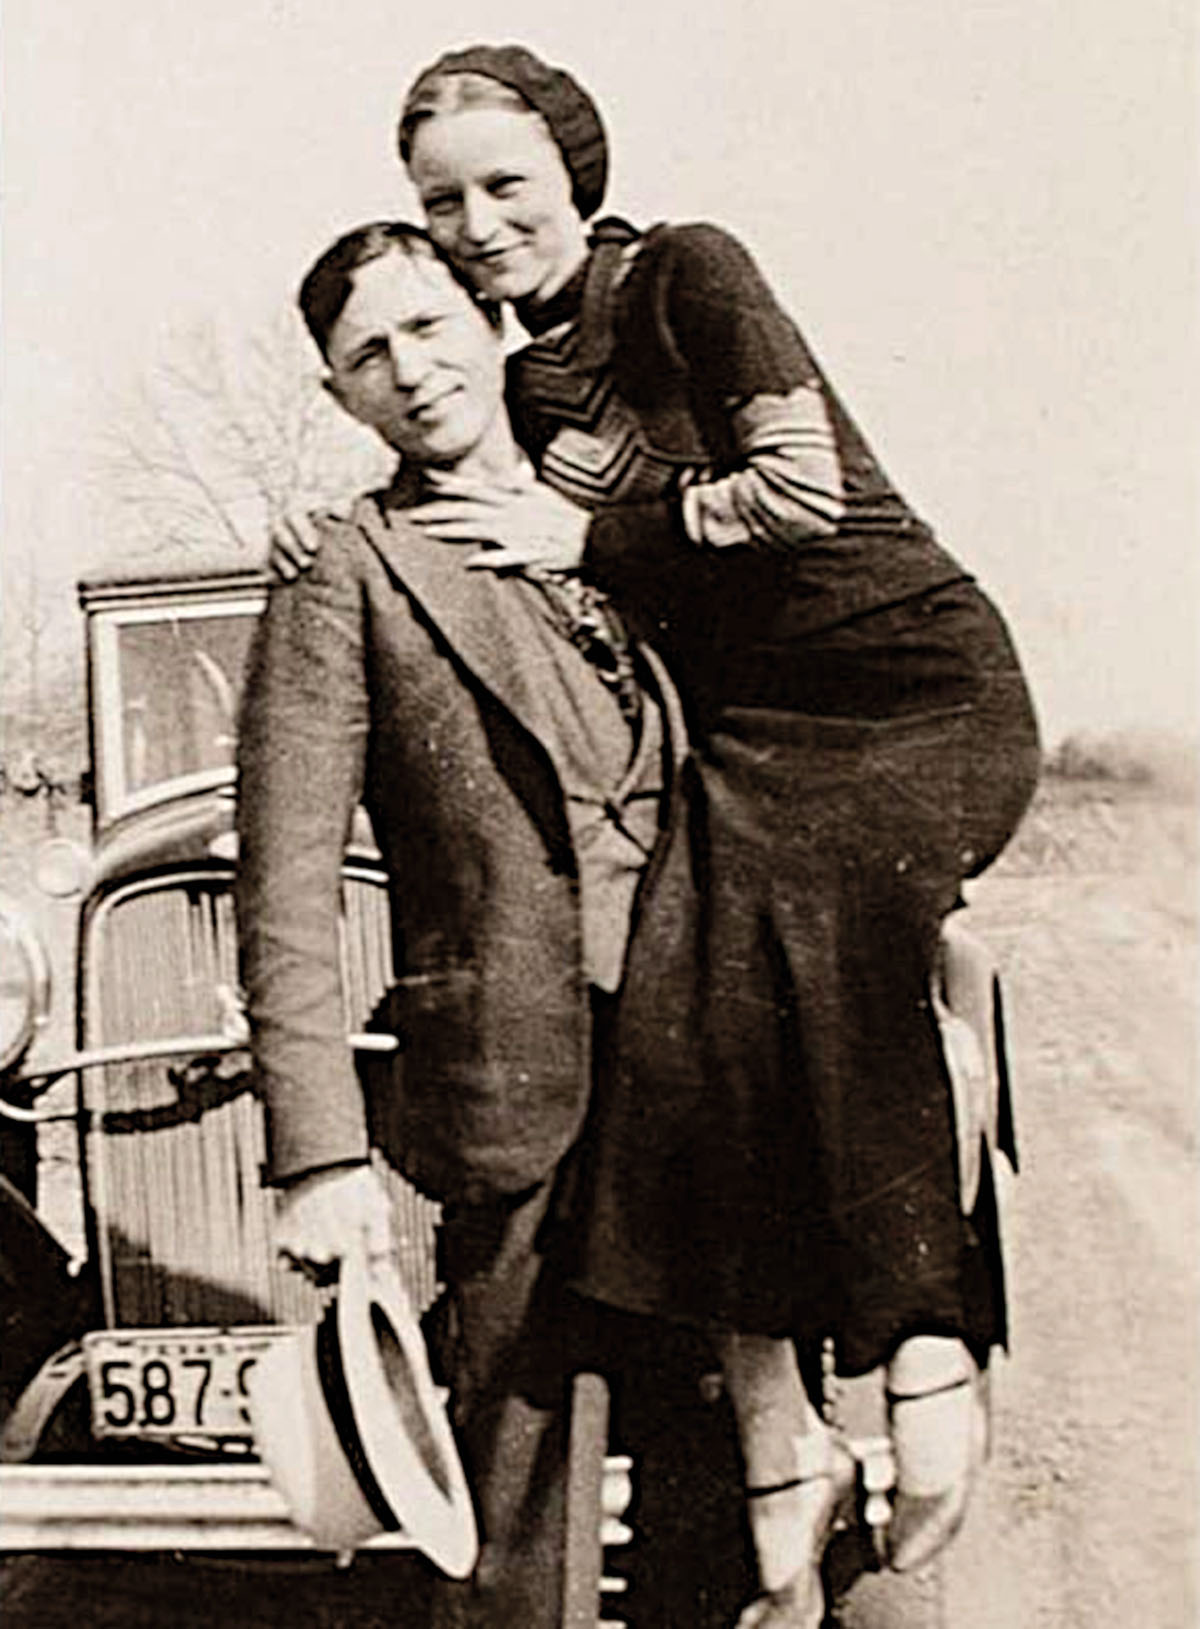 What Do We Really Know About Bonnie and Clyde and Their Legacy in